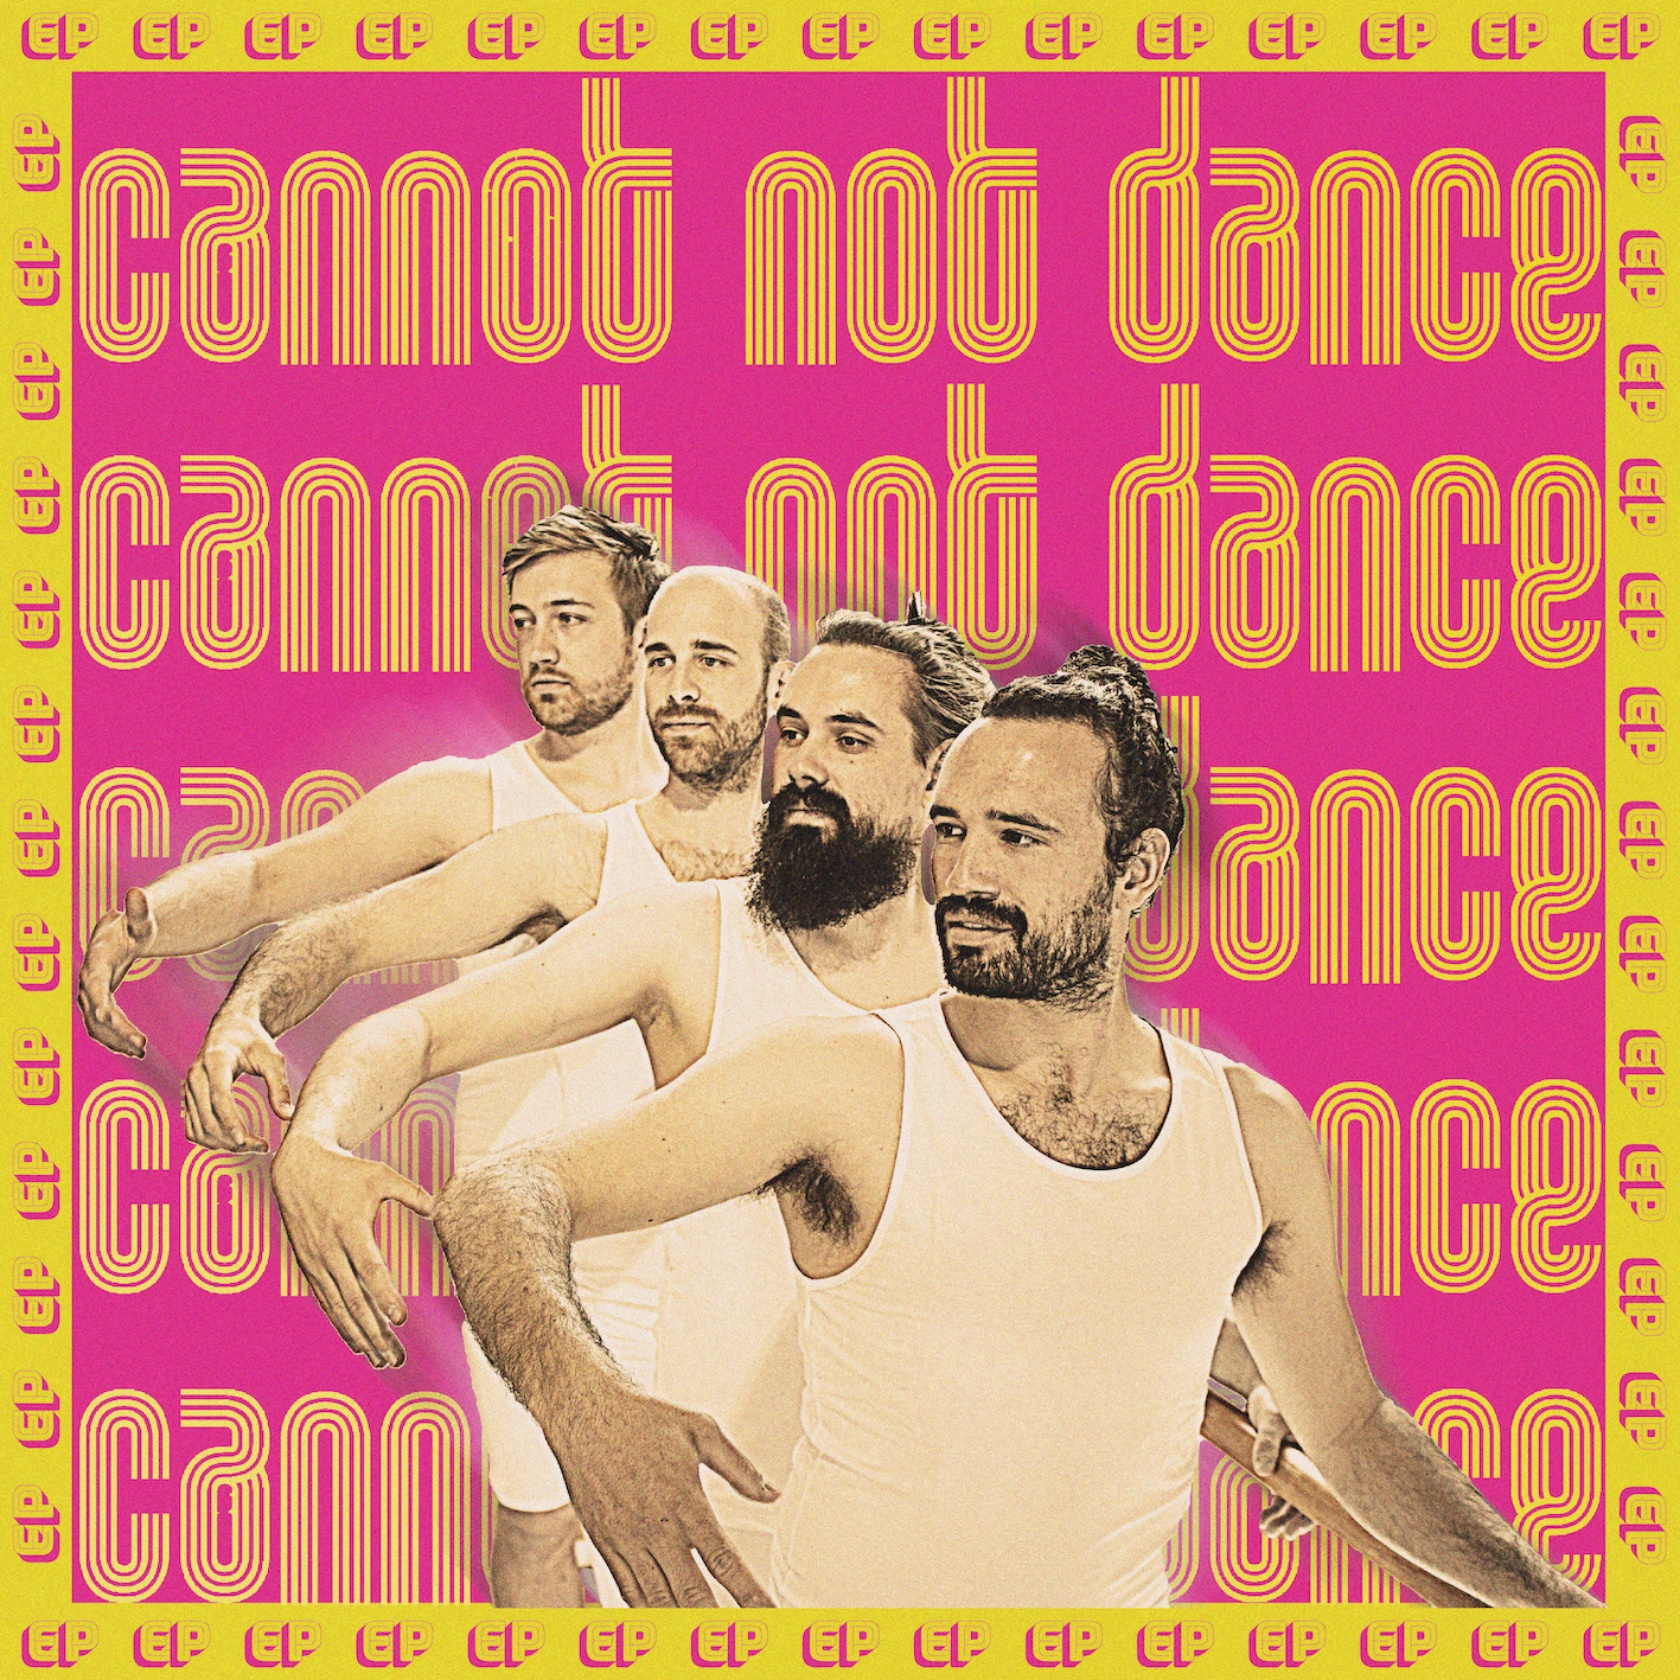 Carvel - EP Cover Cannot Not Dance (c) Jerome Schwarz